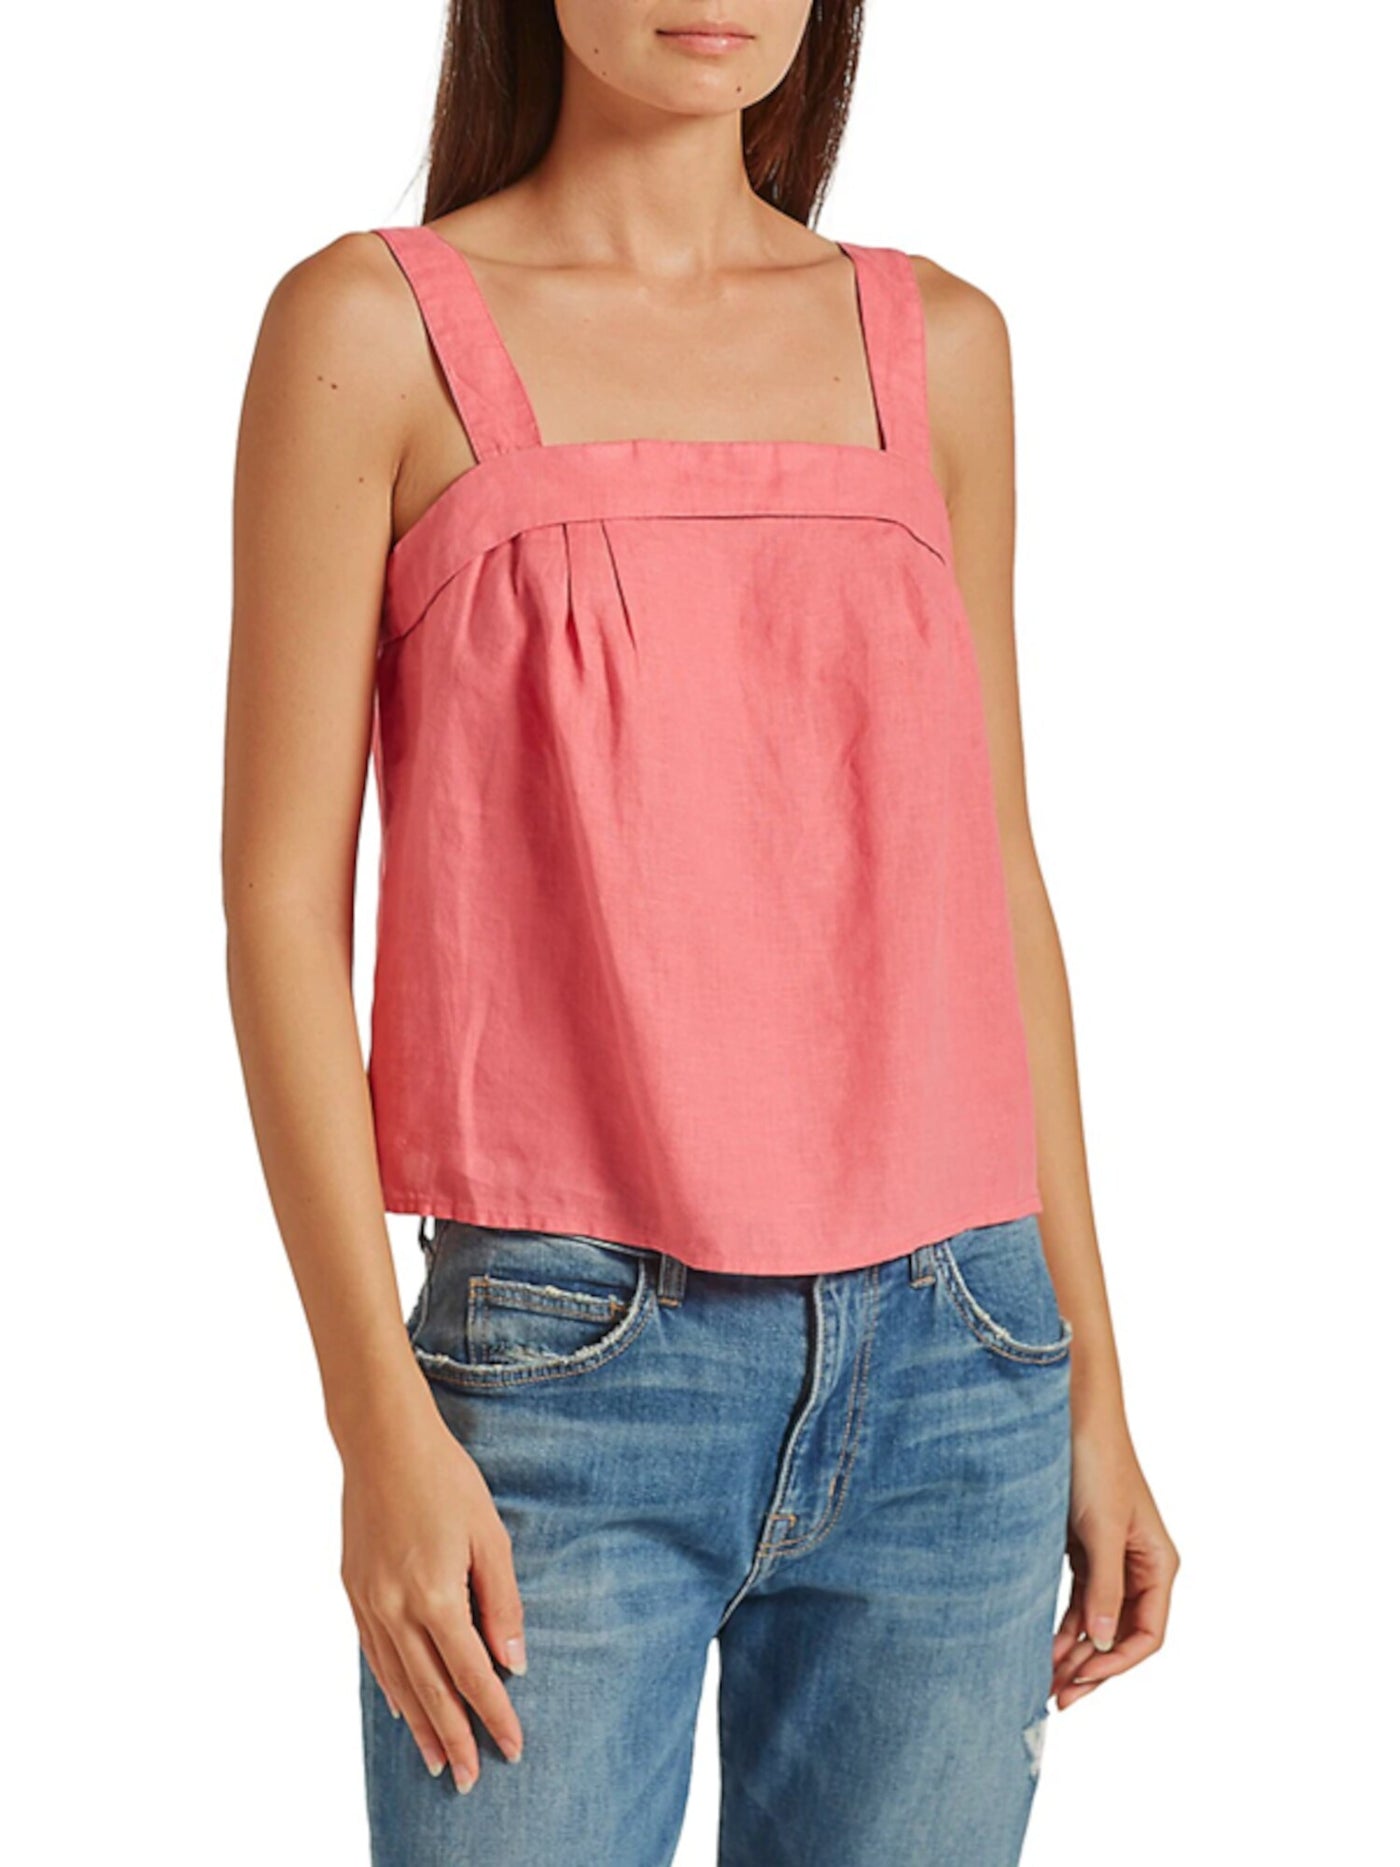 JOIE Womens Pink Zippered Boxy Fit Sleeveless Square Neck Tank Top L